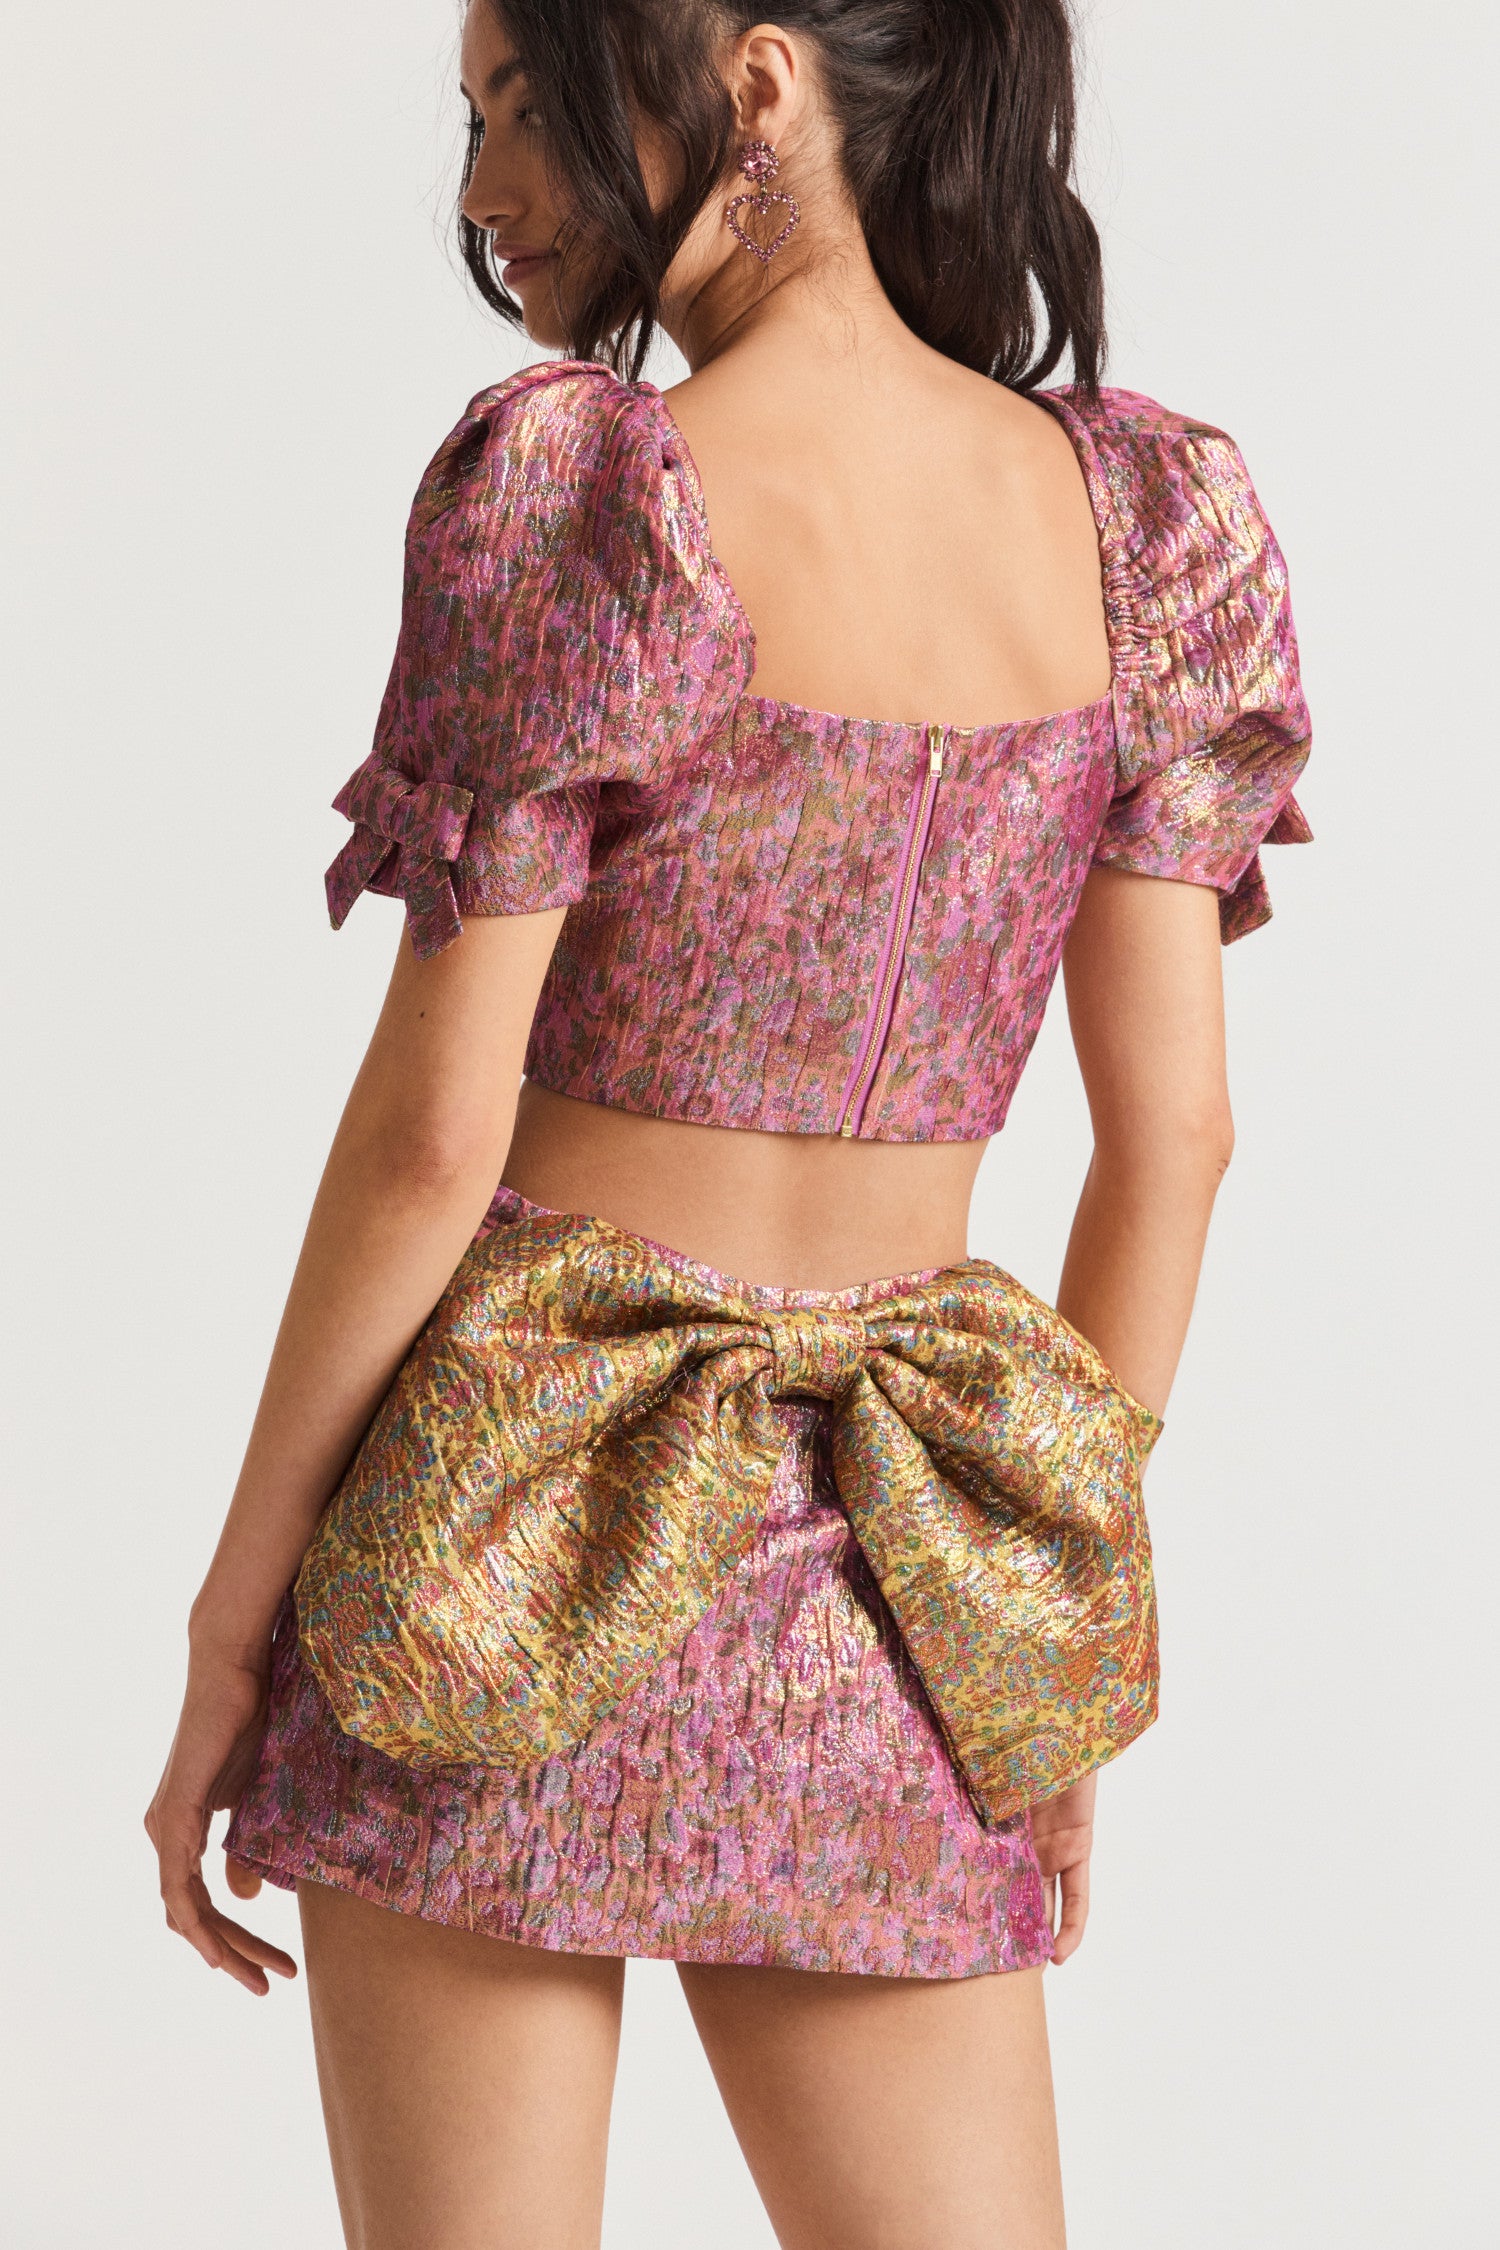 Pink micro mini skirt, low-waisted with a decadent textural crocheted fabric with luxurious floral print. Features a bow on the back in a contrasting print.